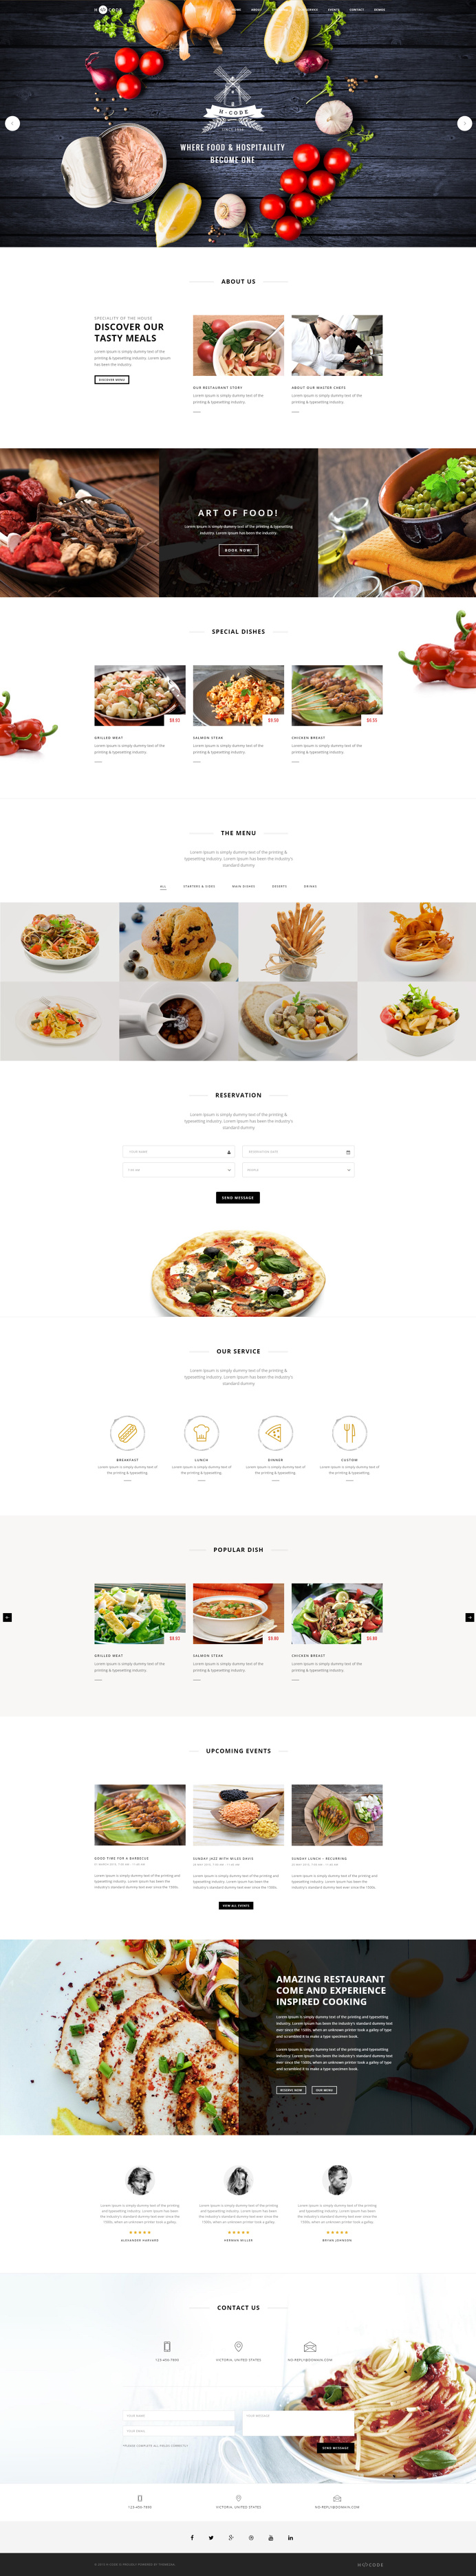 H-Code #Responsive & #Multipurpose #OnePage and #MultiPage #Template For #Restaurent by #ThemeZaa http://goo.gl/ygs4kX